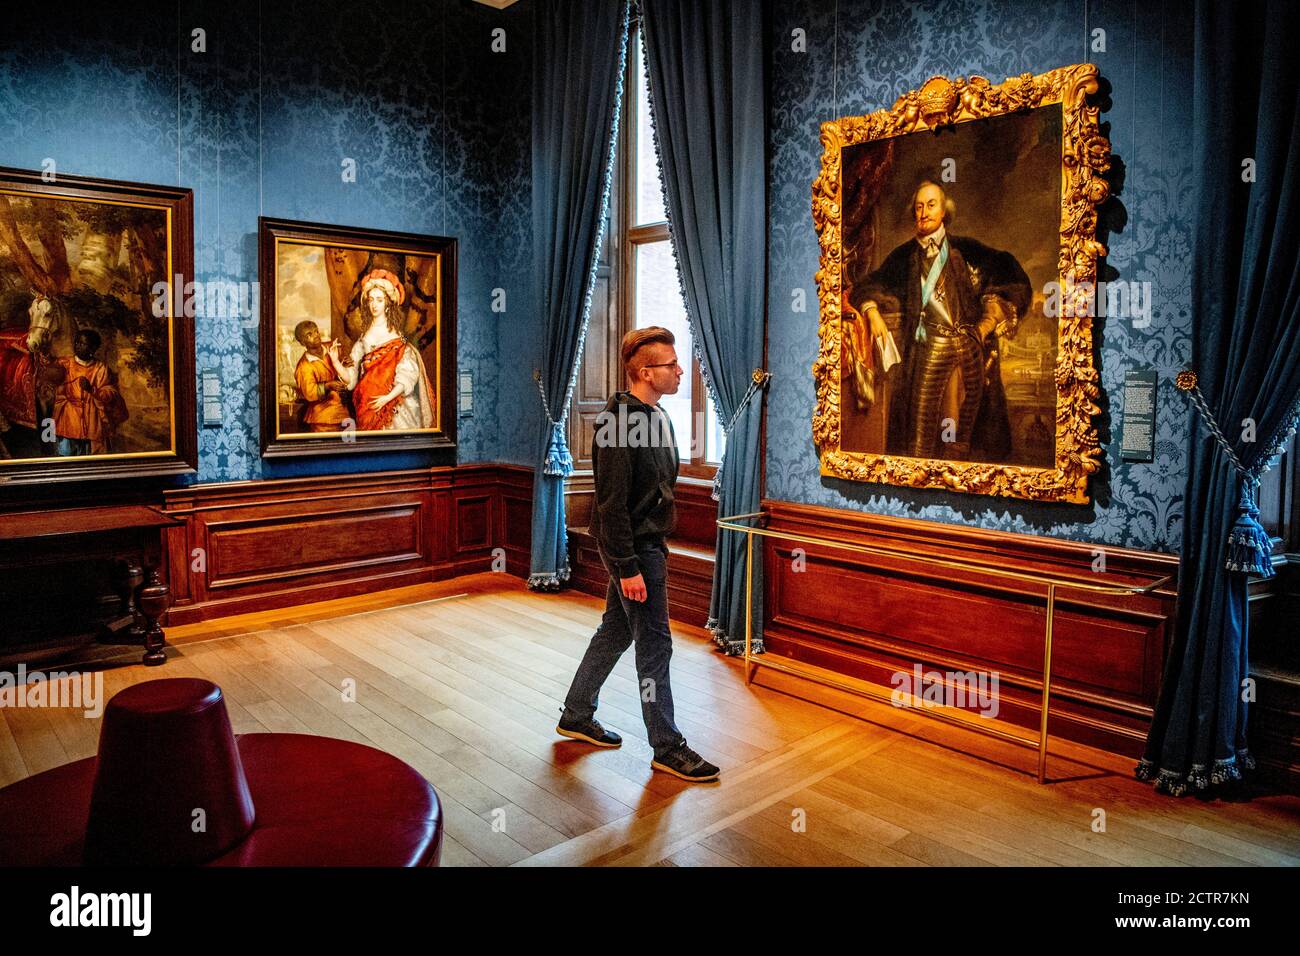 A man looks at the Painting in the new room.The Mauritshuis museum is furnishing a new room for a permanent presentation of works dedicated to Johan Maurits, Count of Nassau-Siegen and client of the Mauritshuis. Stock Photo